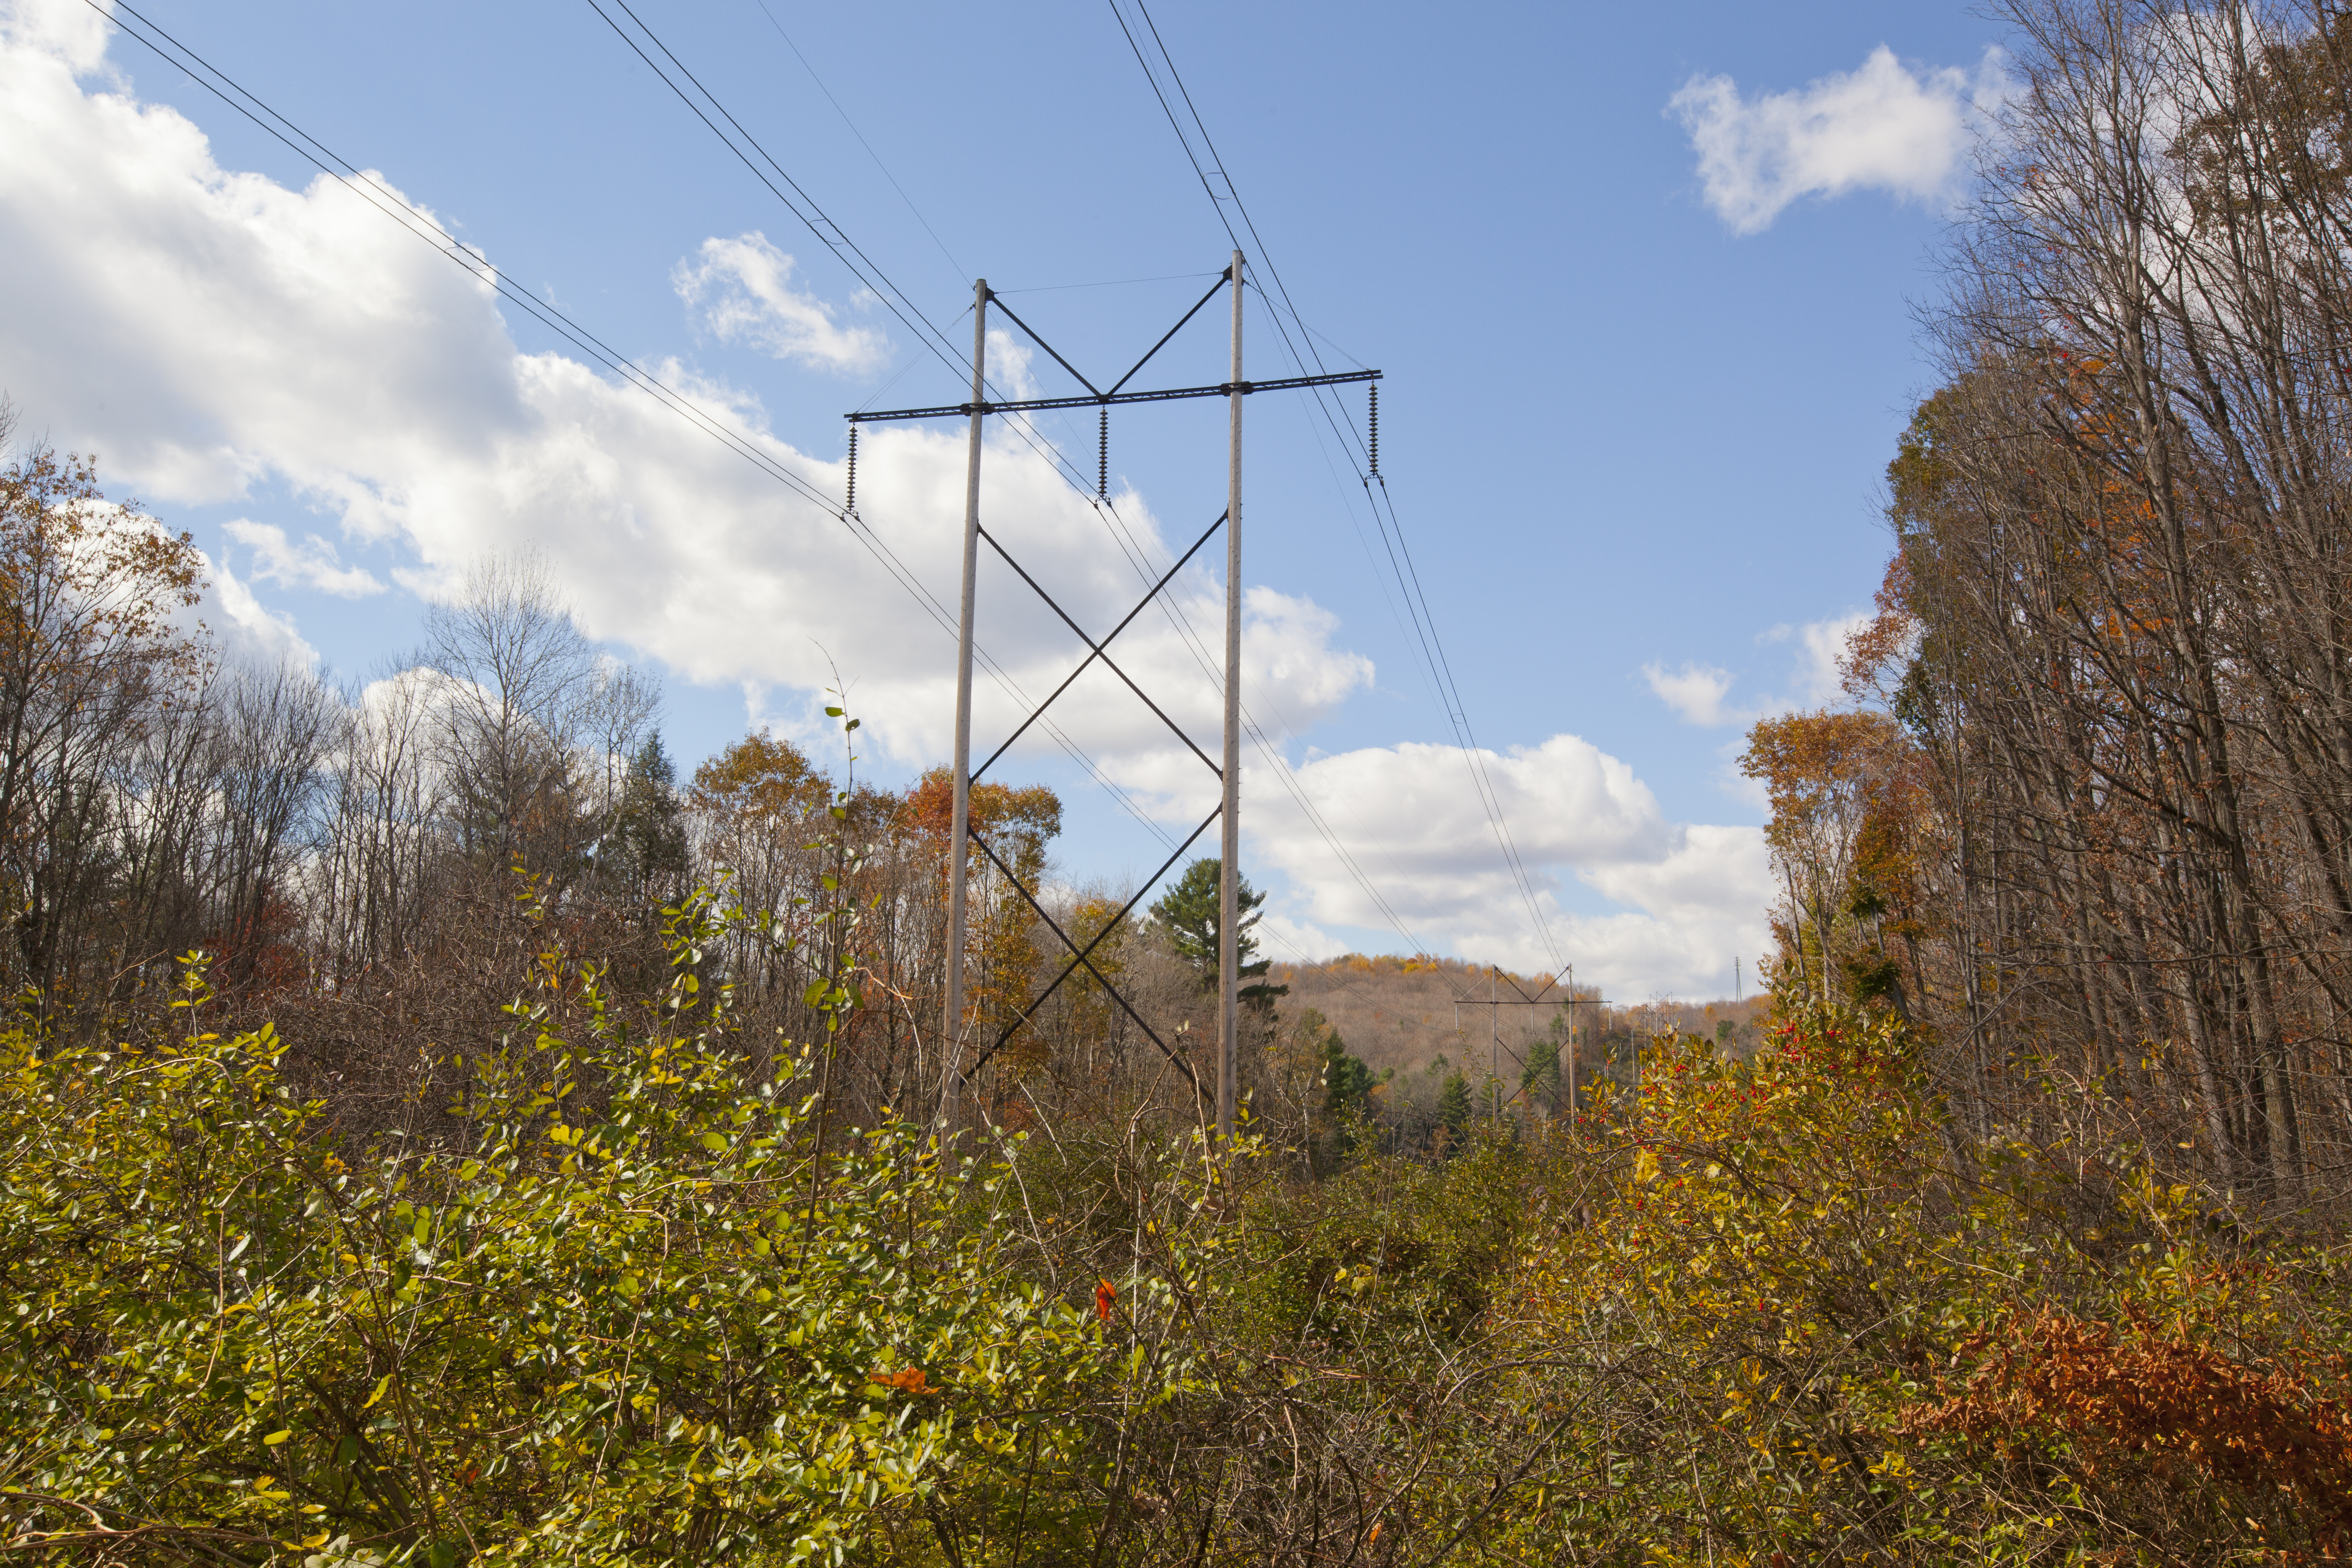 A view of high tension wires with autumn foliage. (Getty Images)